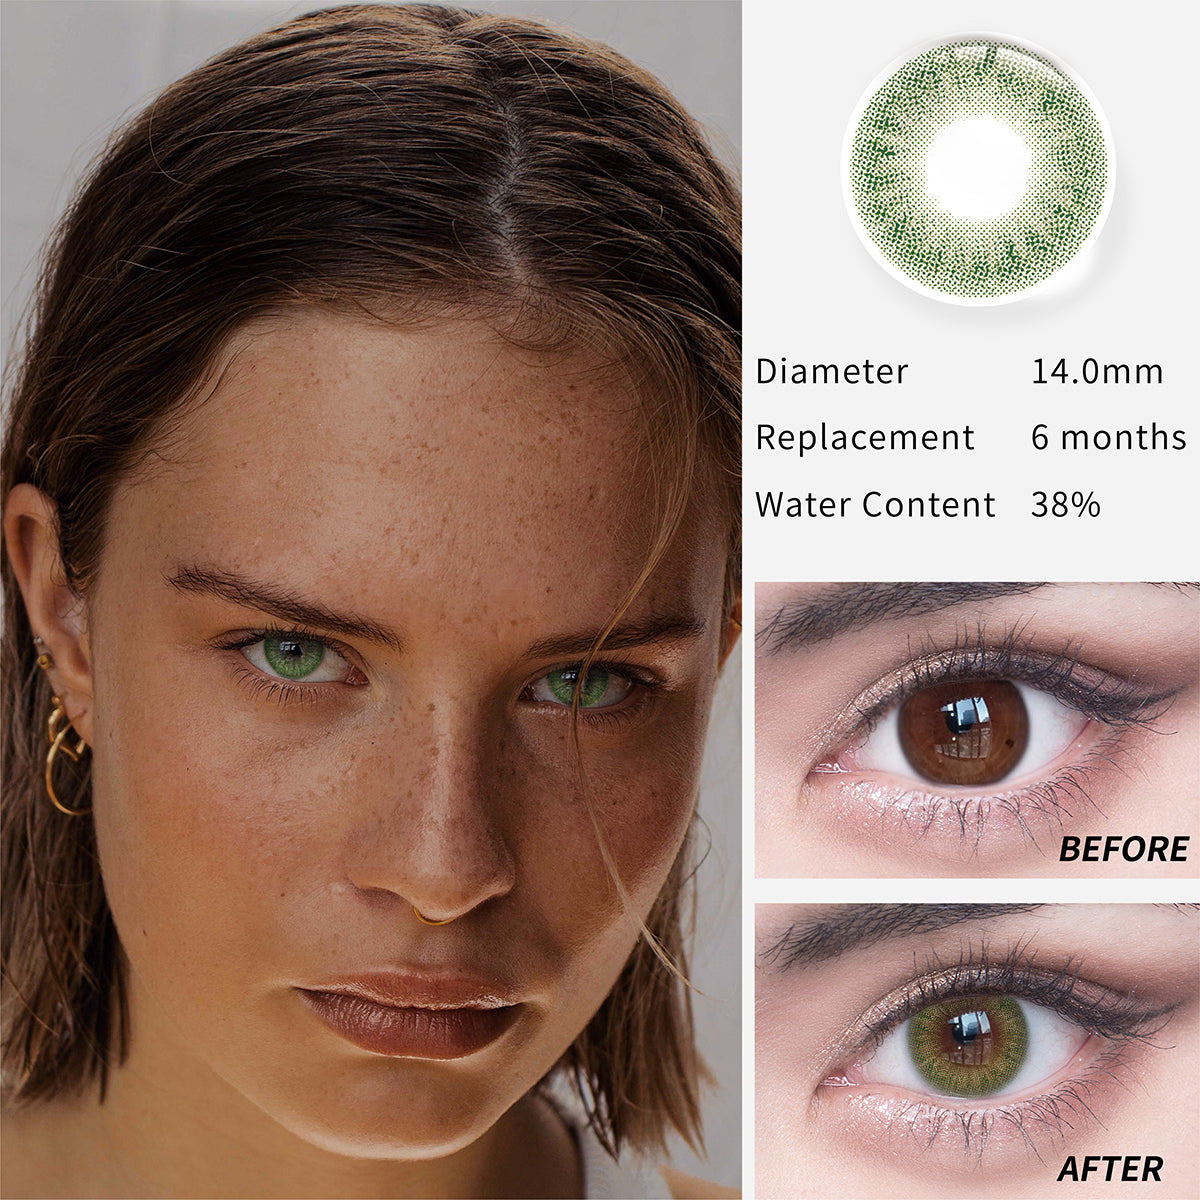 1Pcs FDA Certificate Eyes Colorful Contact Lenses - Nile green